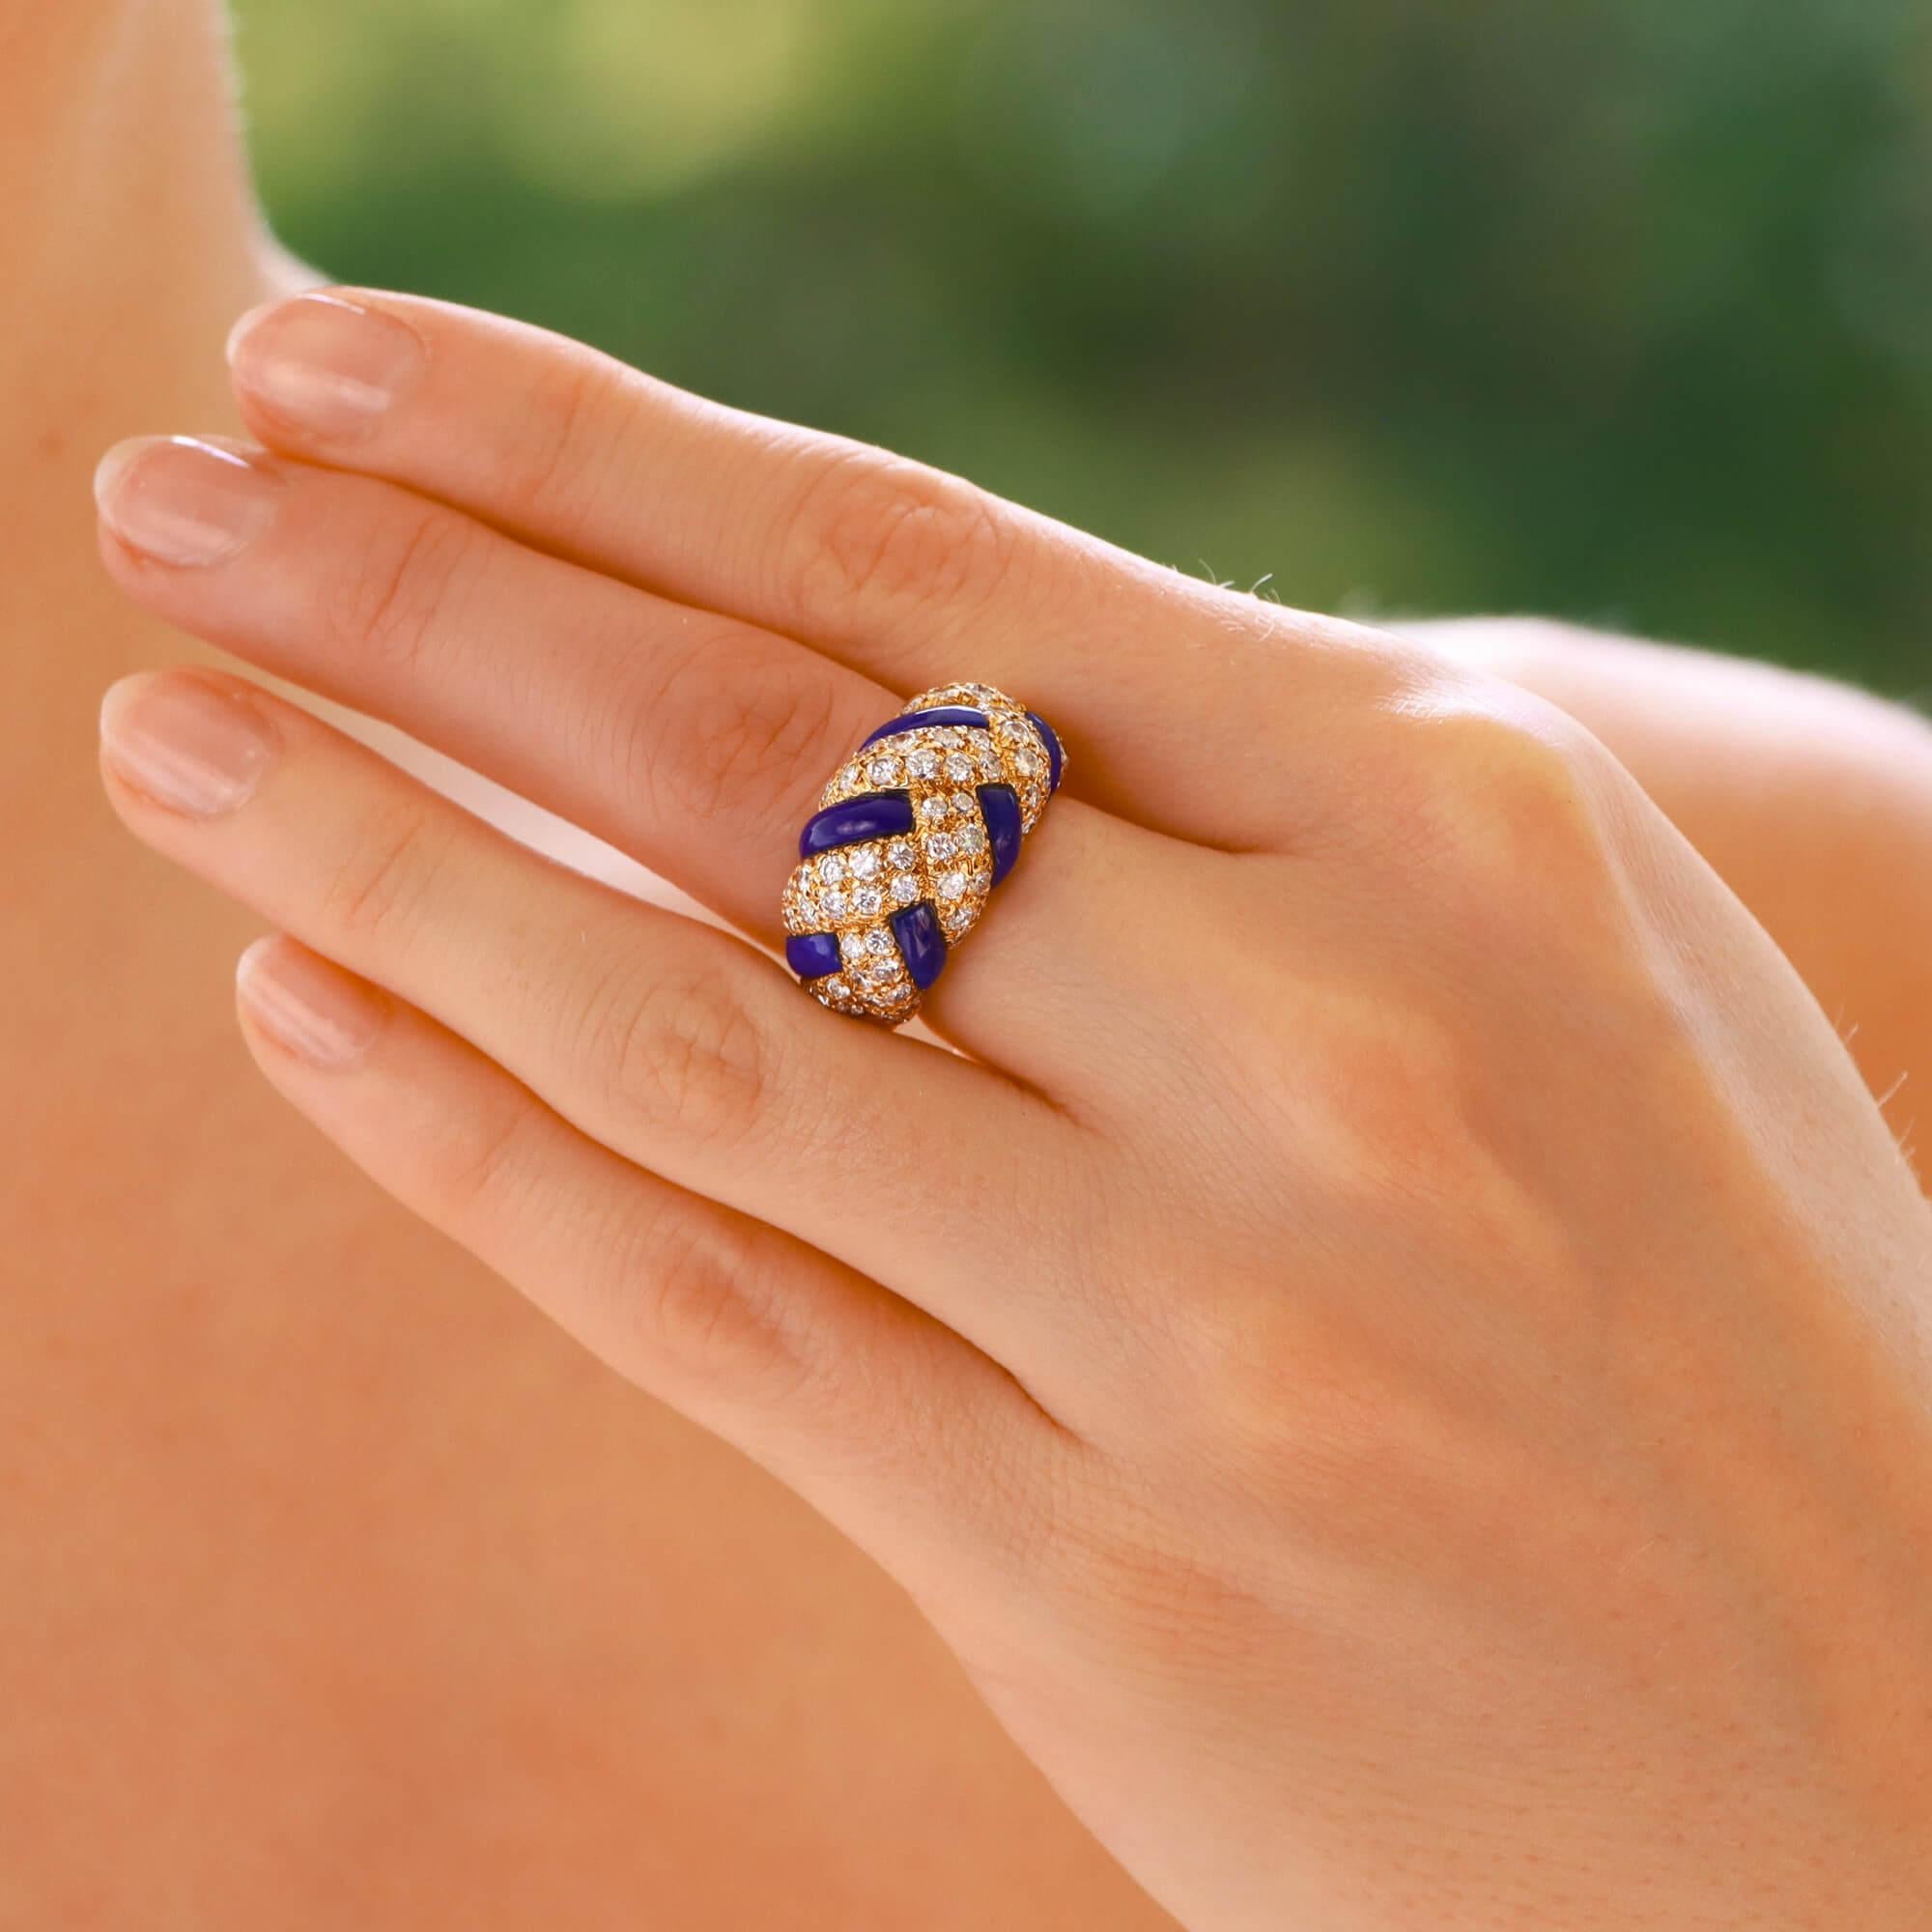 A beautiful vintage Van Cleef and Arpels lapis and diamond bombe dress ring set in 18k yellow gold.

The ring features a unique plaited design composed of lapis lazuli and pave set diamond panels. The contrast of the Royal blue lapis against the